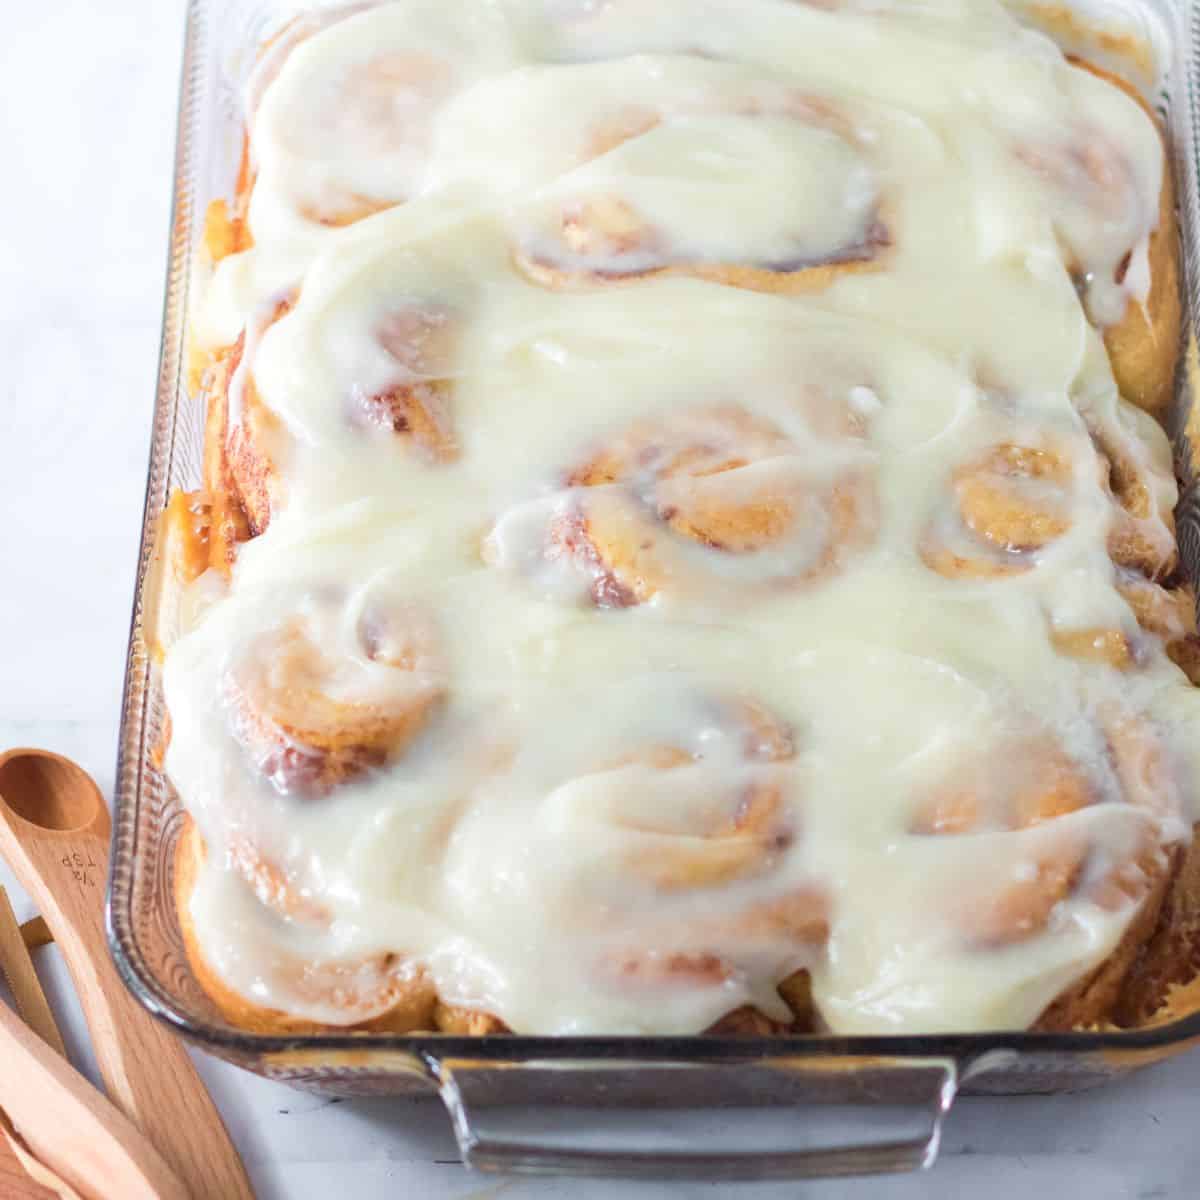 A casserole filled with warm baked cinnamon rolls topped with frosting.